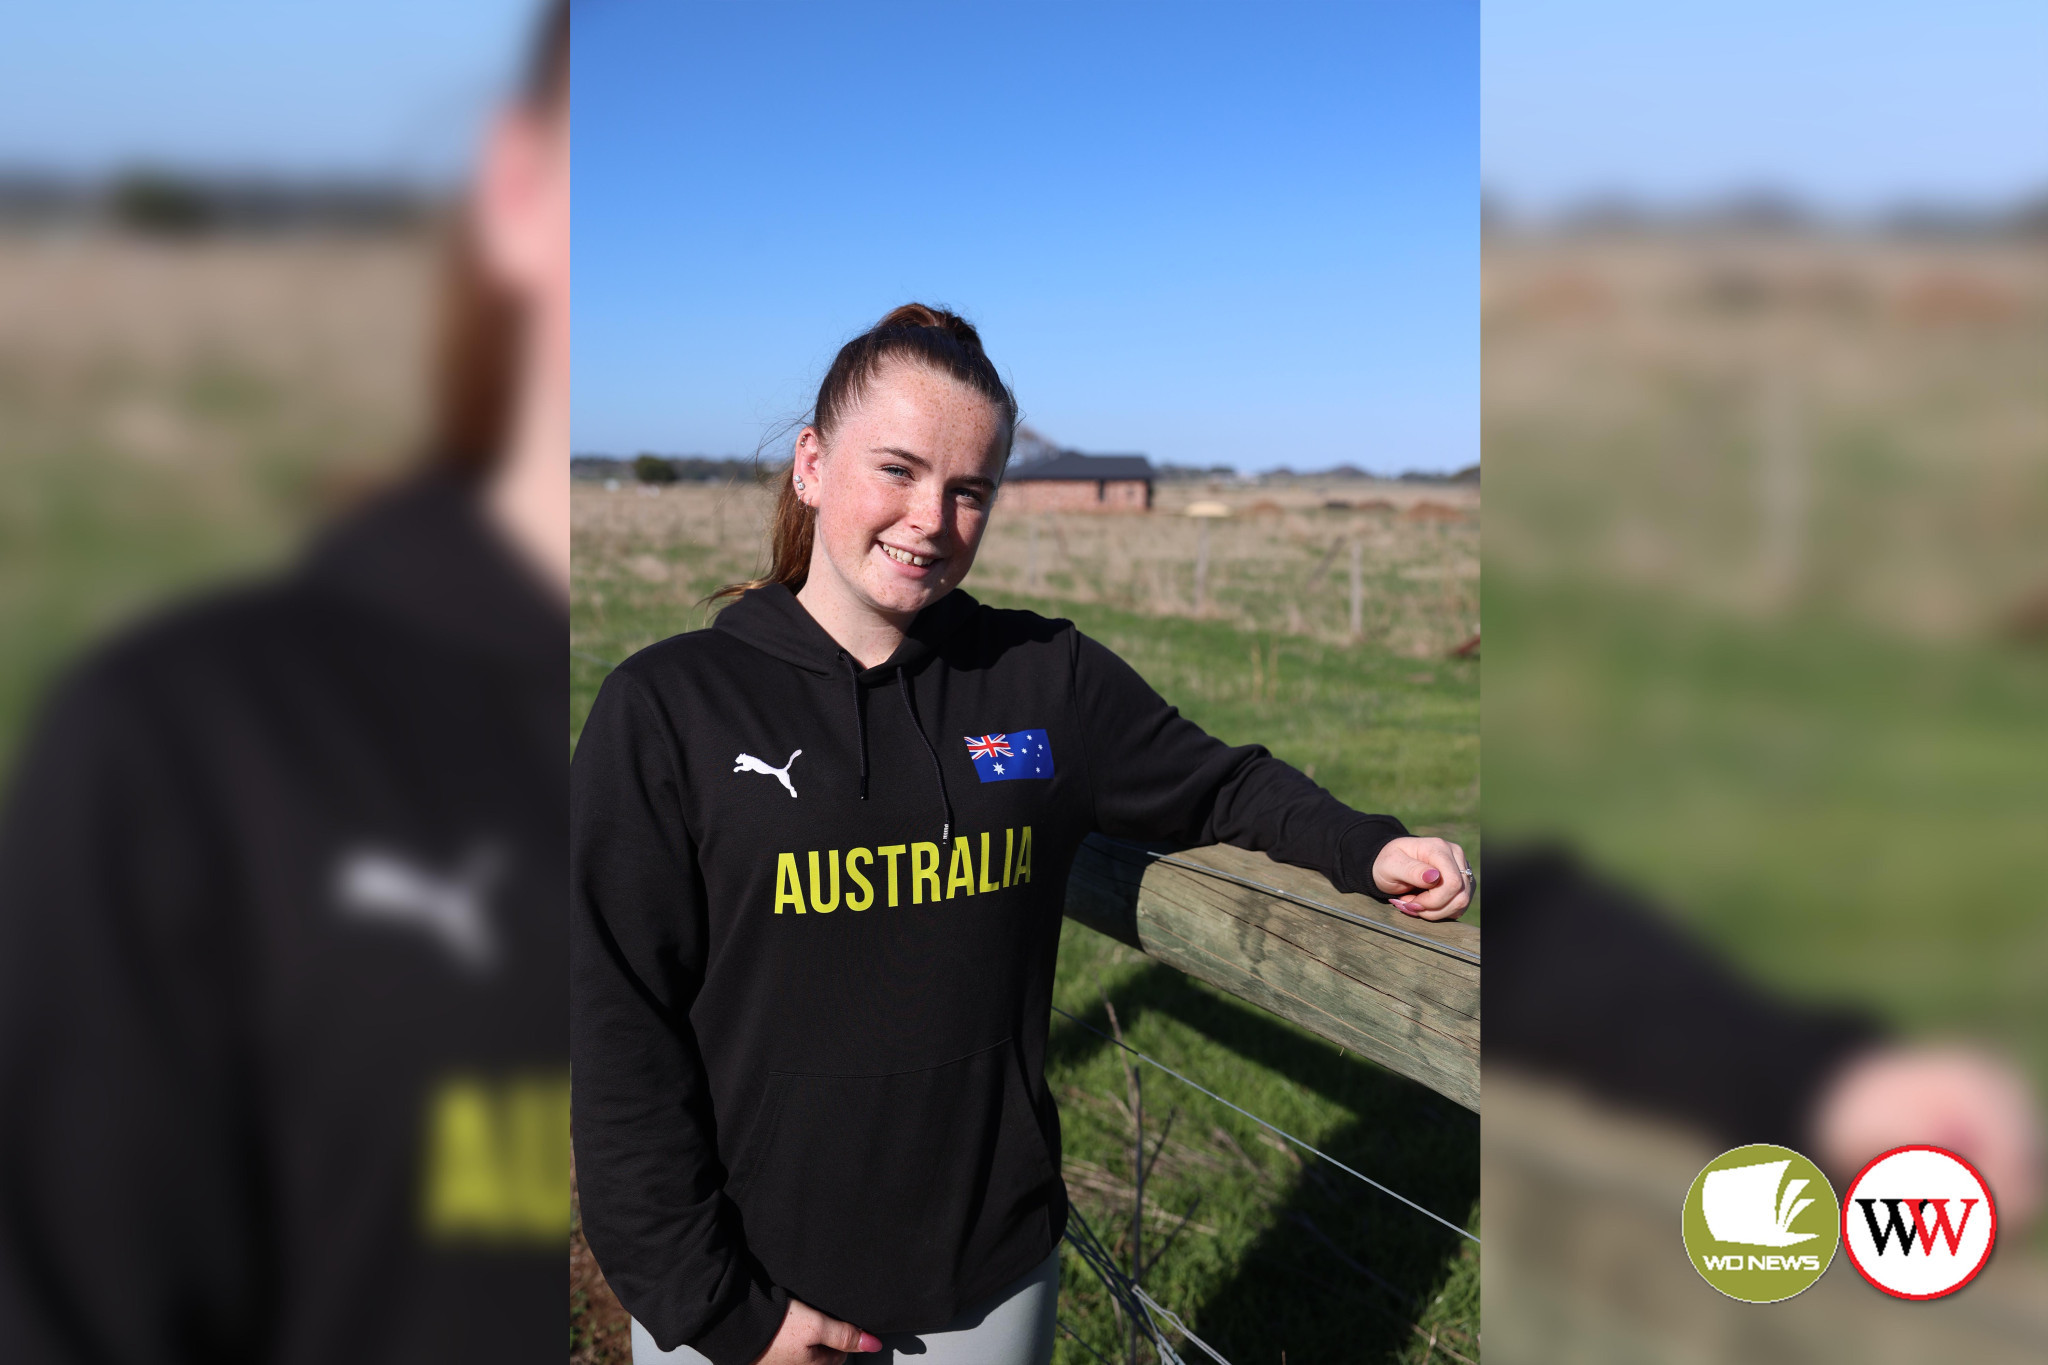 Caytlyn Sharp, at home in Koroit, is looking forward to representing Australia at the Oceania Athletics Championships in Suva, Fiji.